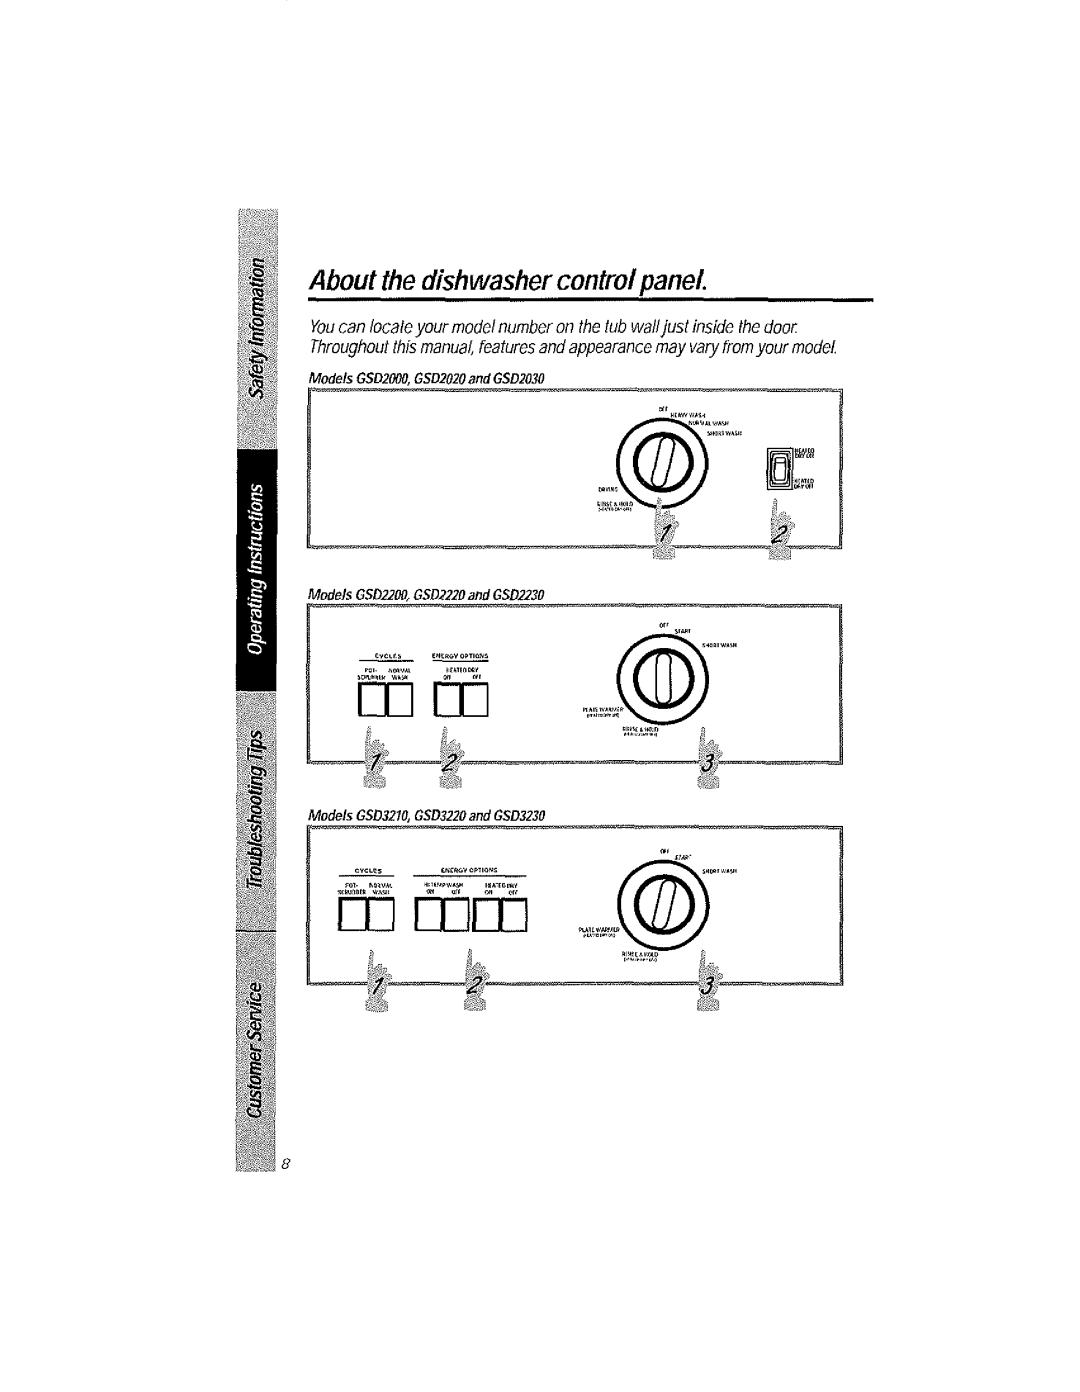 GE GSD2000, GSD2230, GSD2020, GSD2030, GSD2200 manual About the dishwasher control panel, Models GSD3210, GSD3220 and GSD3230 